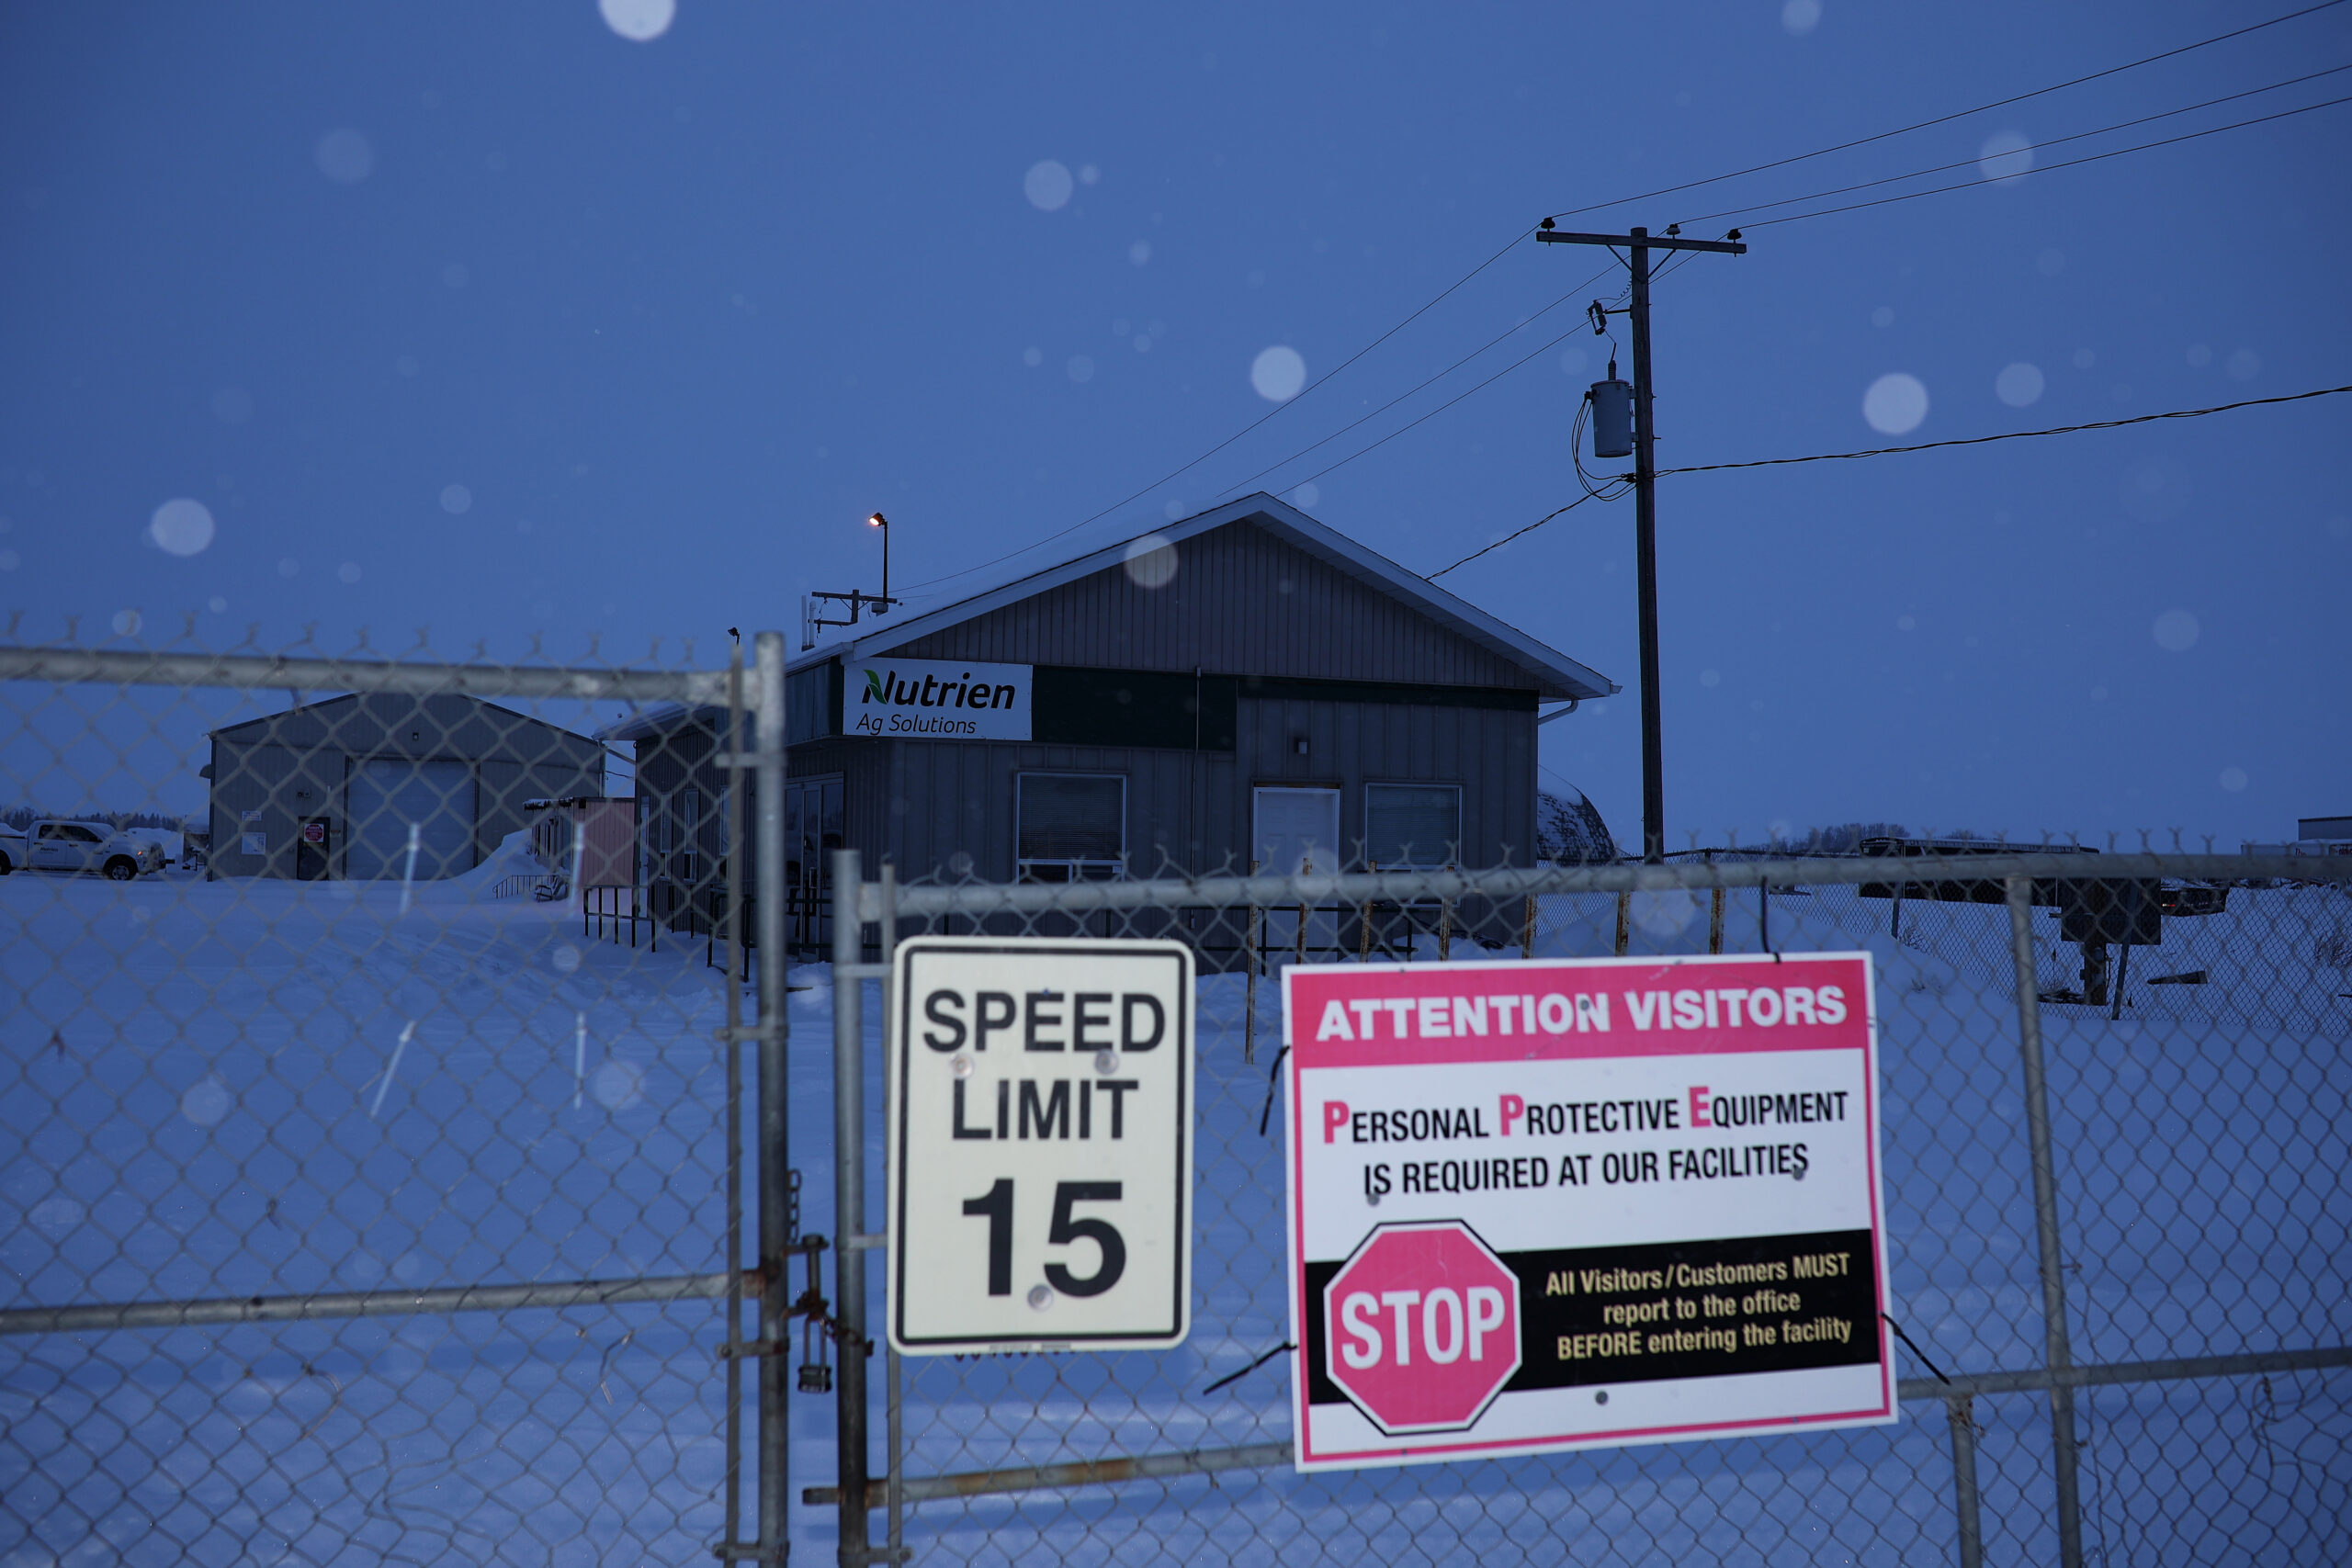 A Nutrien fertilizer facility on Imperial Oil-owned land in Yorkton, Saskatchewan. The site is contaminated.